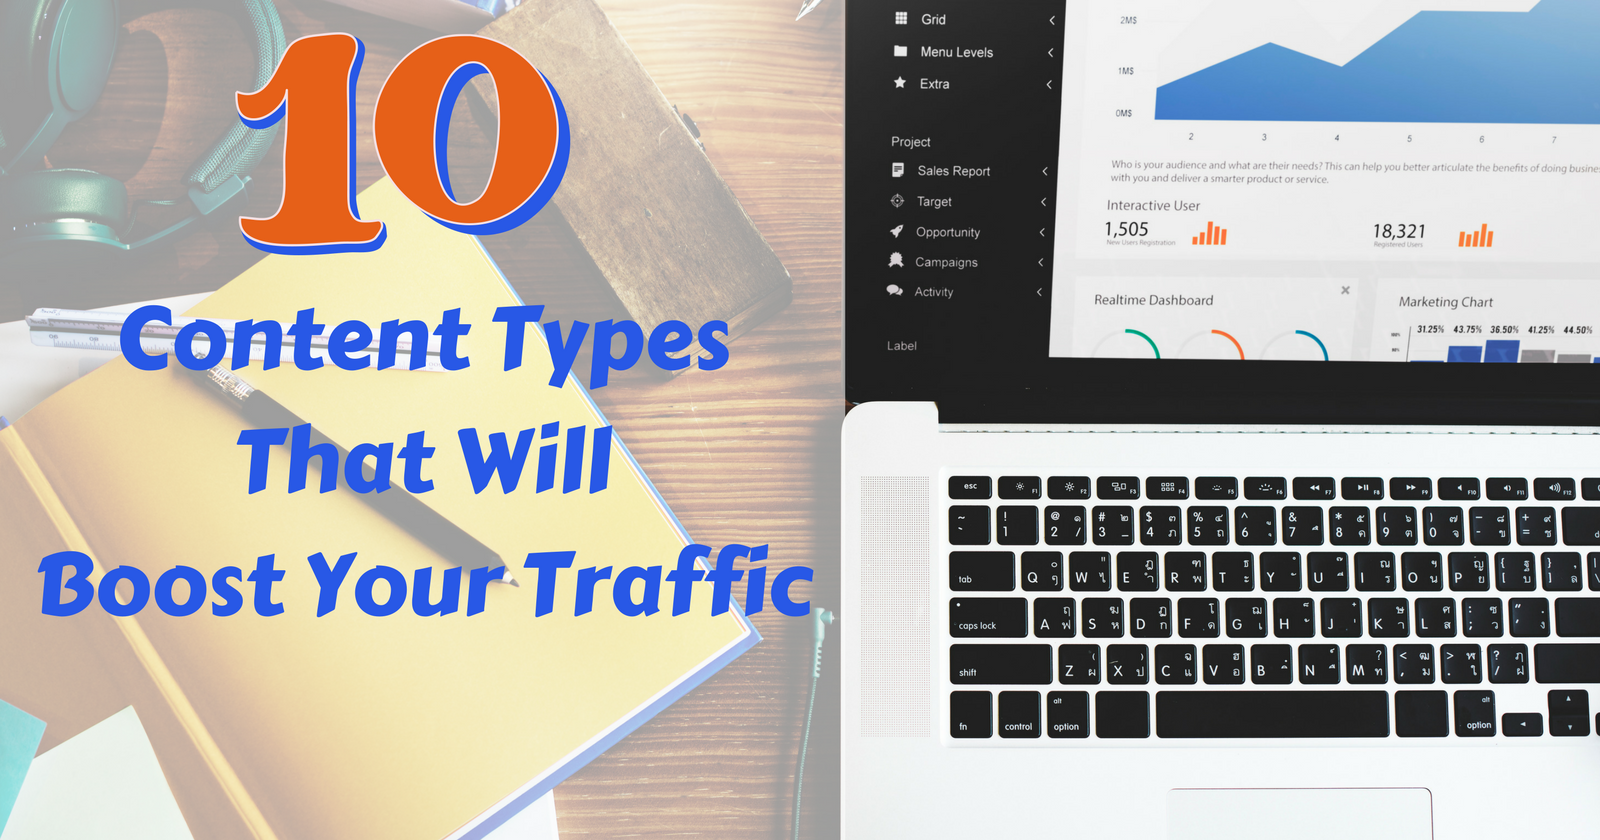 10-content-types-that-will-boost-traffic.png